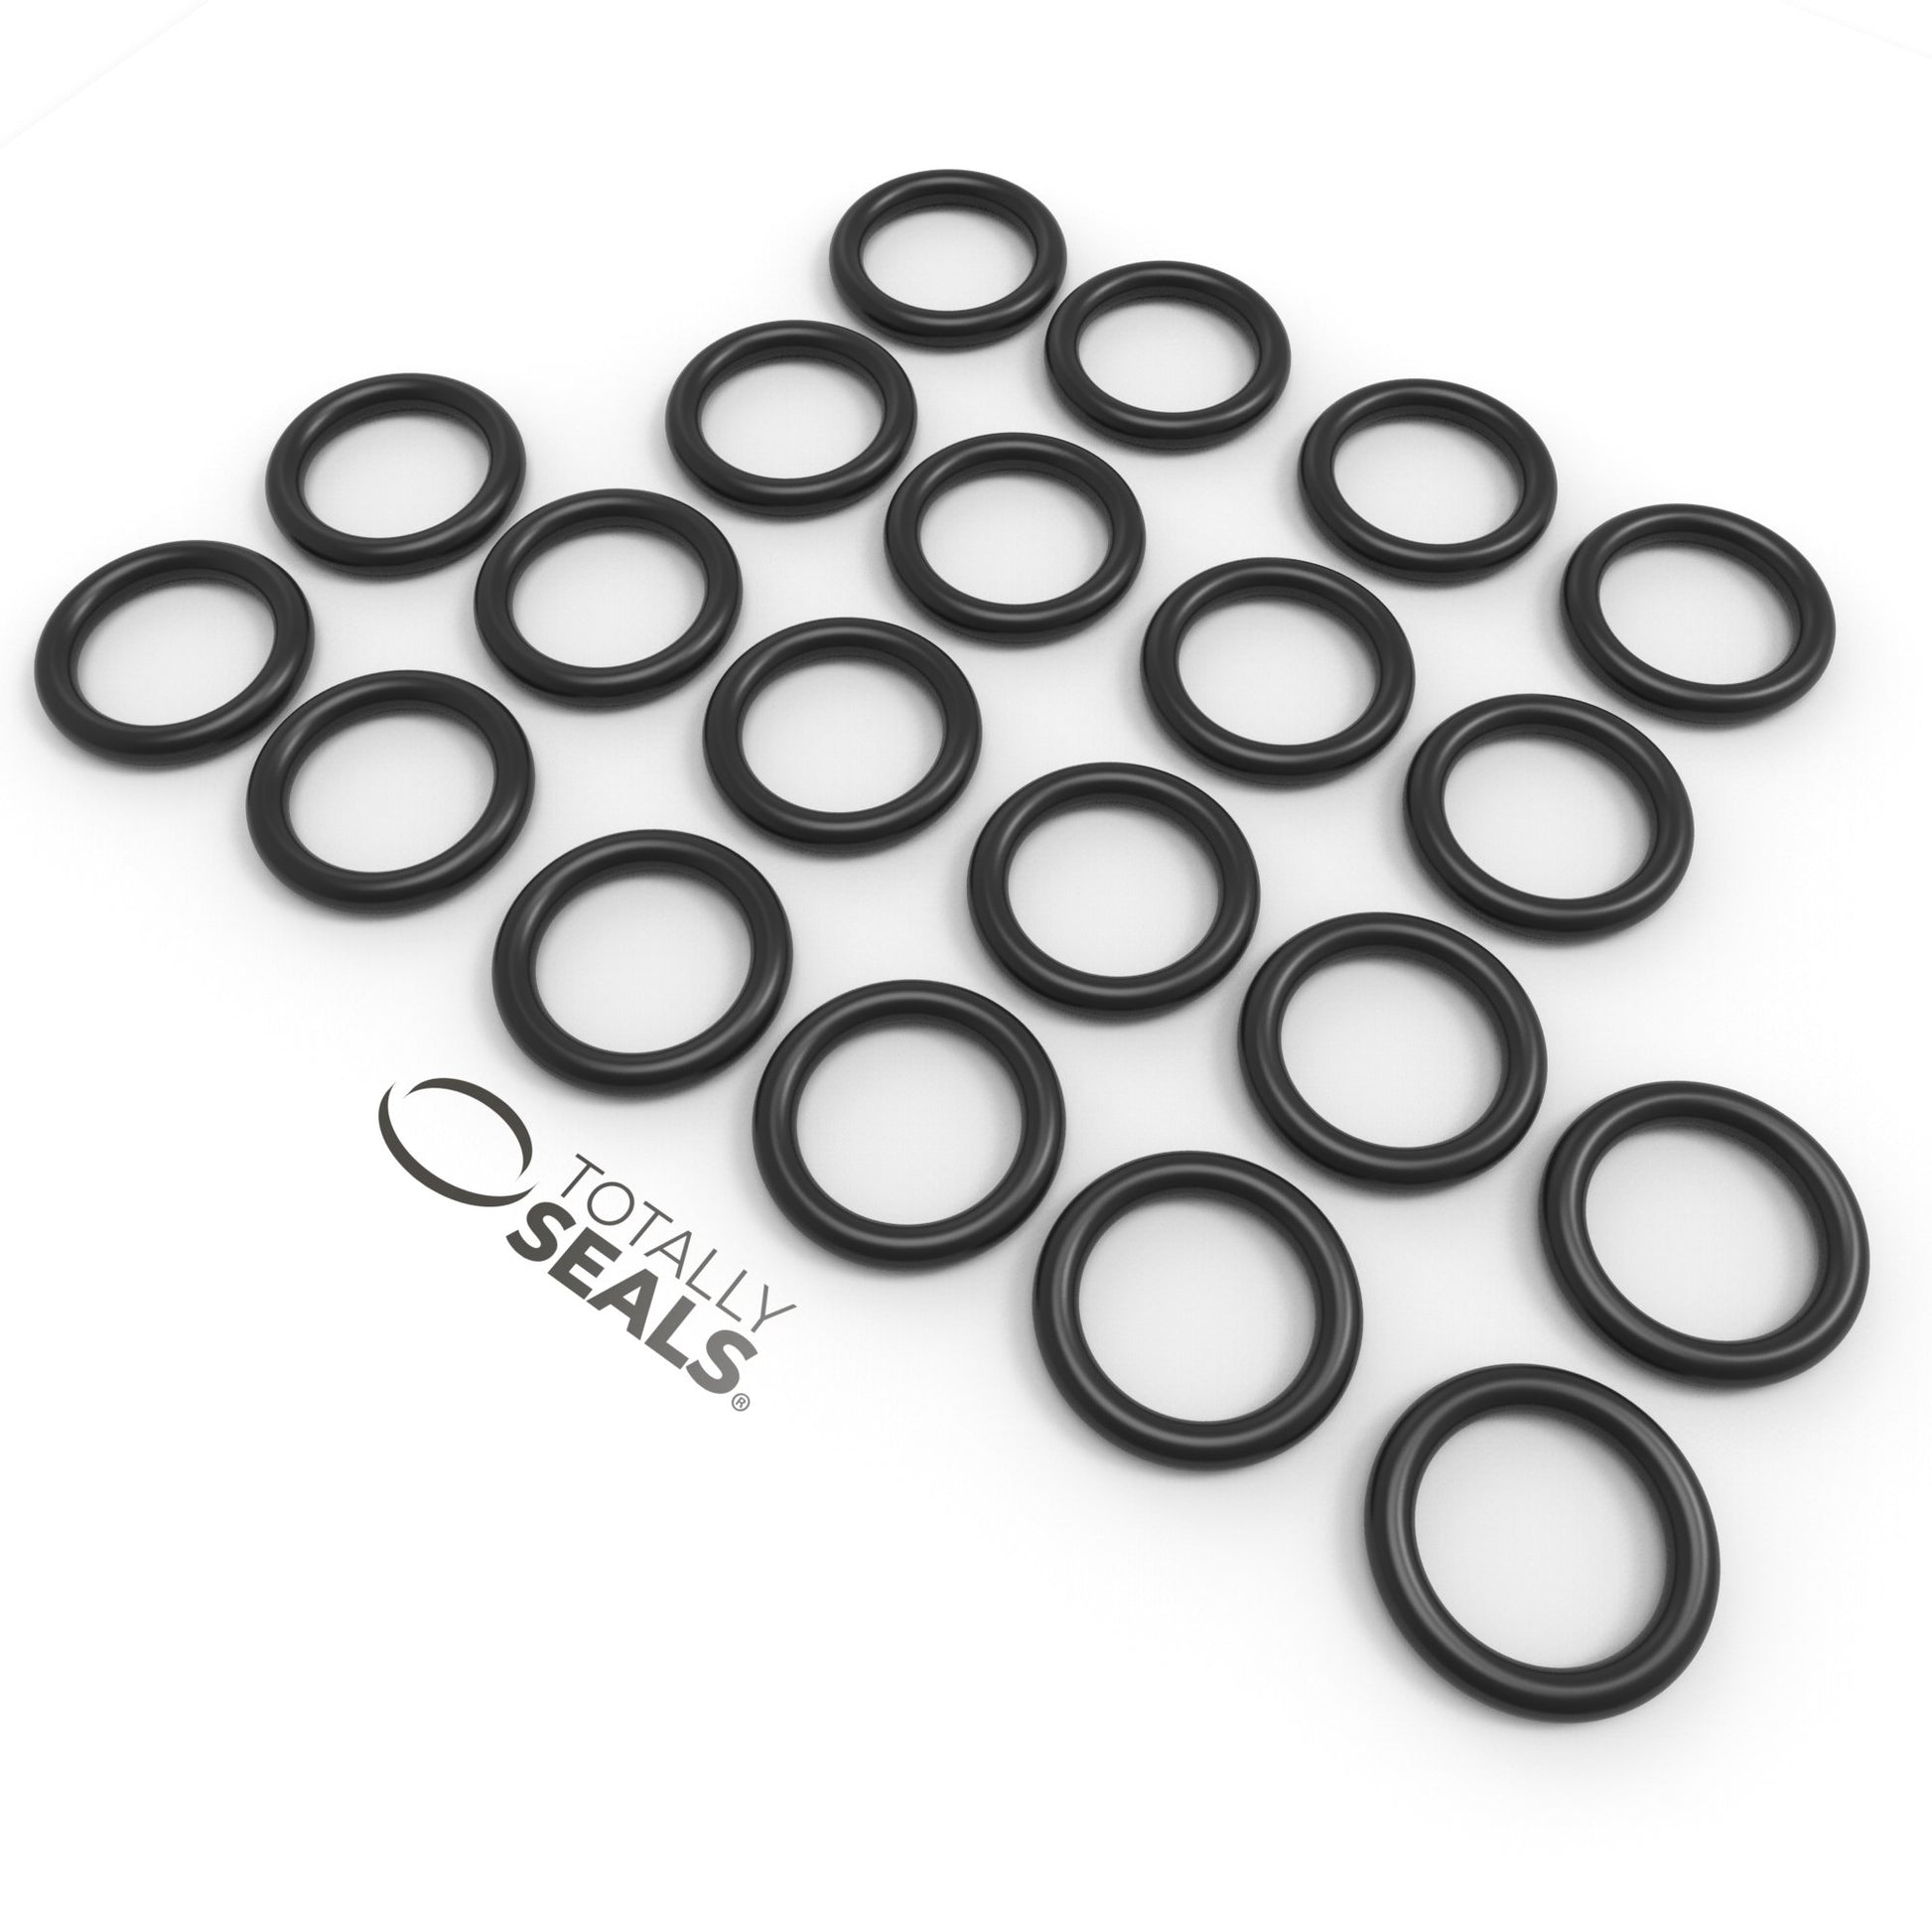 29mm x 3mm (35mm OD) Nitrile O-Rings - Totally Seals®